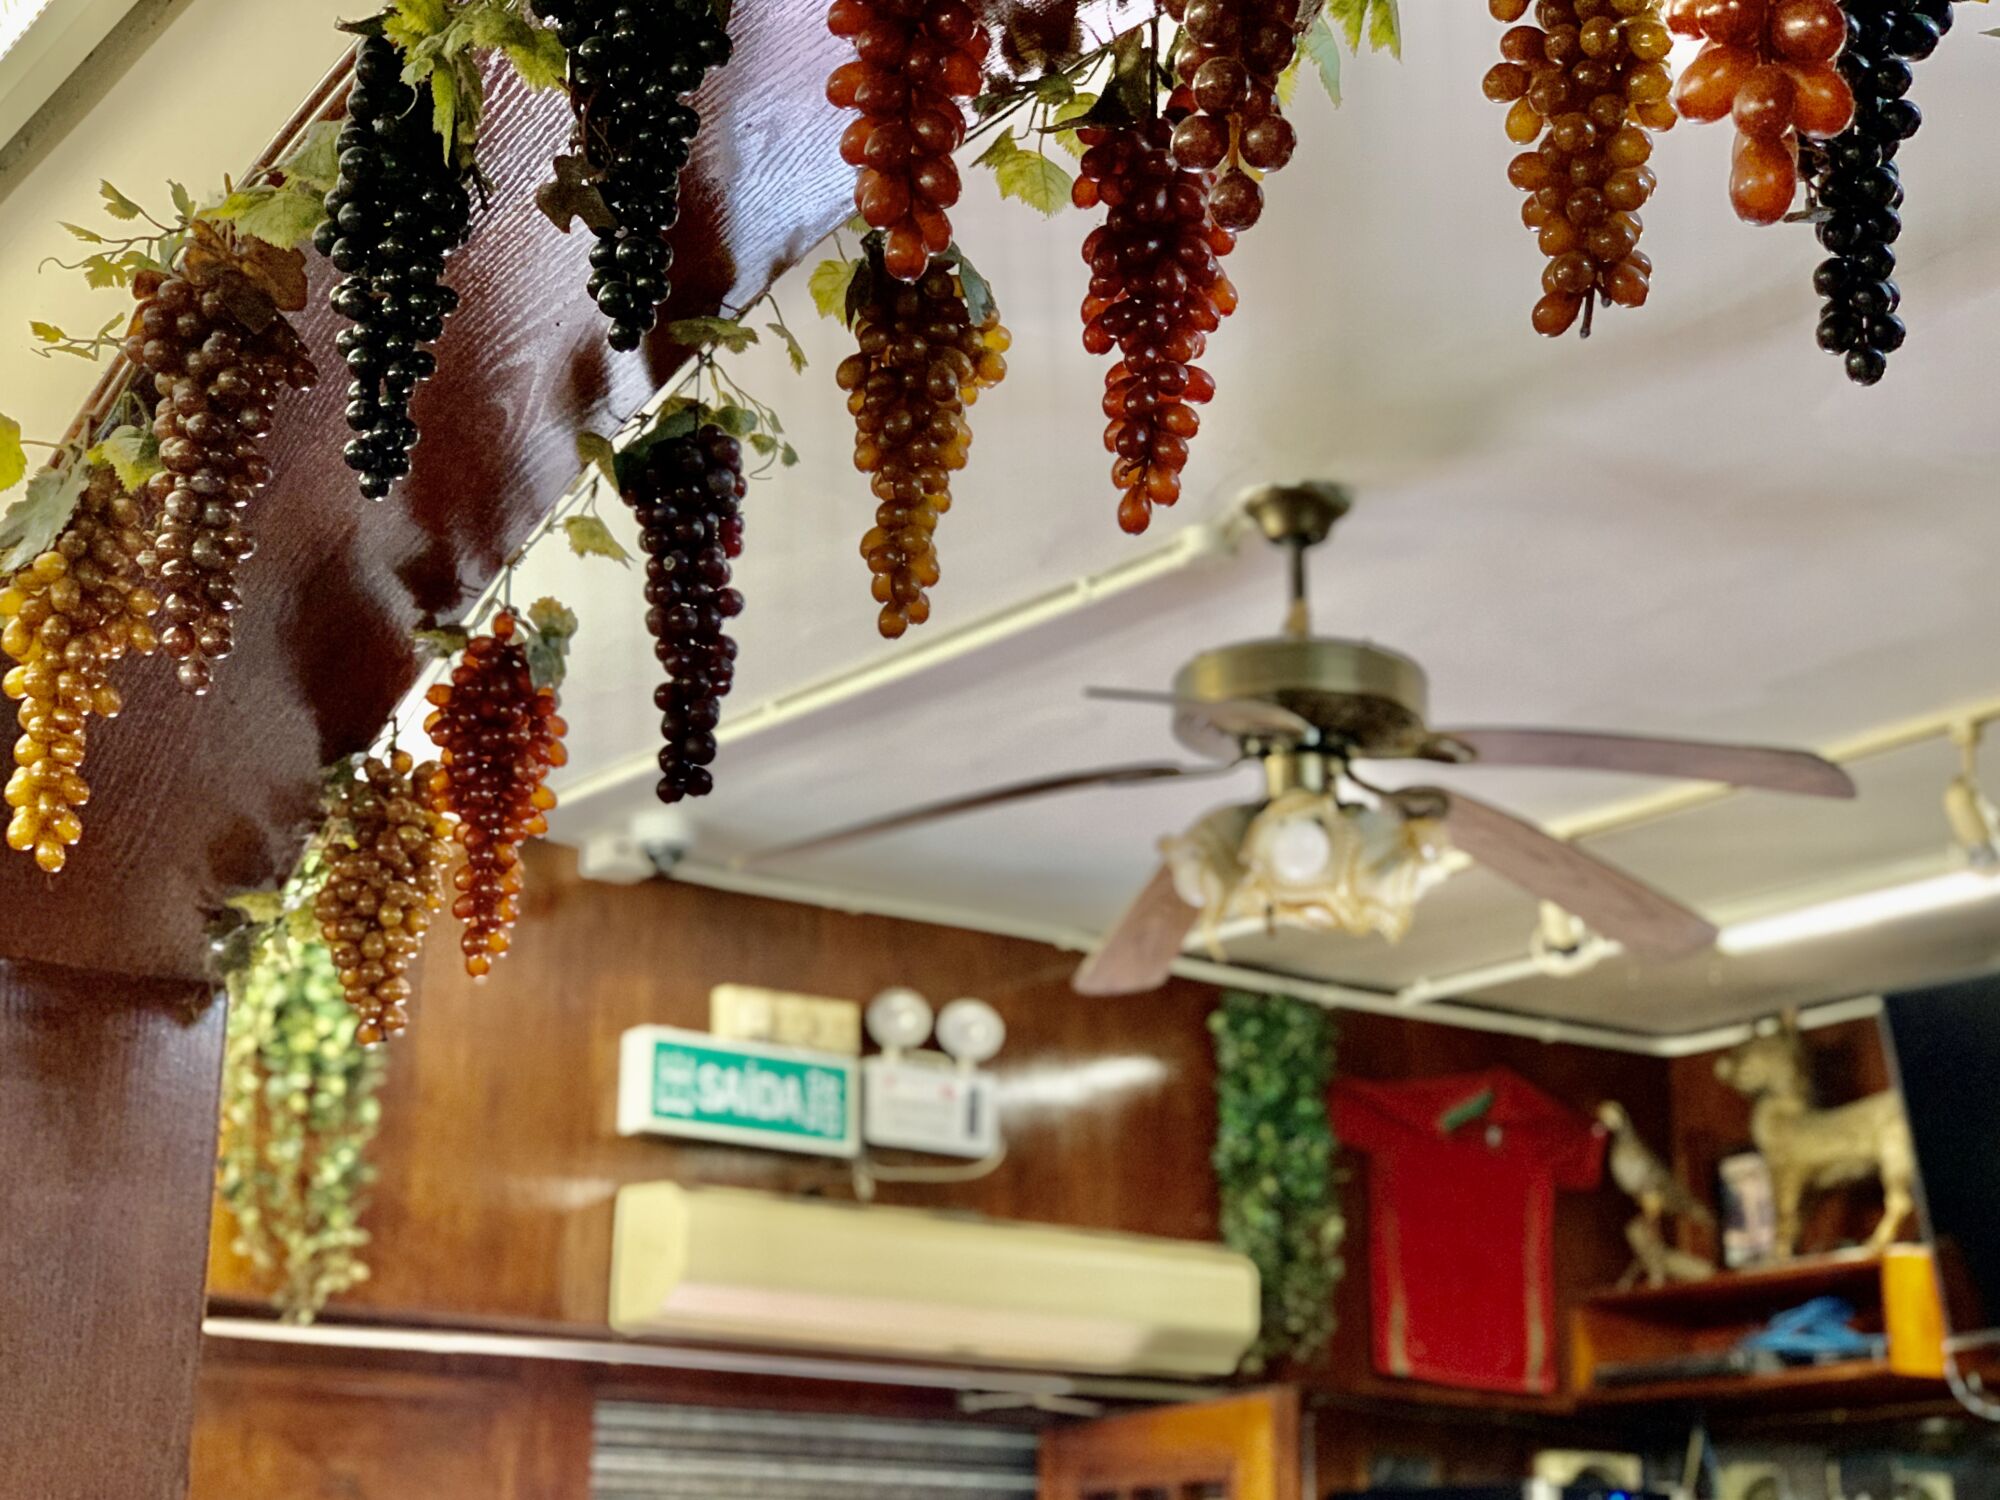 Petisqueira Interior Decorative Grapes in the Ceiling Detail and Fan Macau Lifestyle